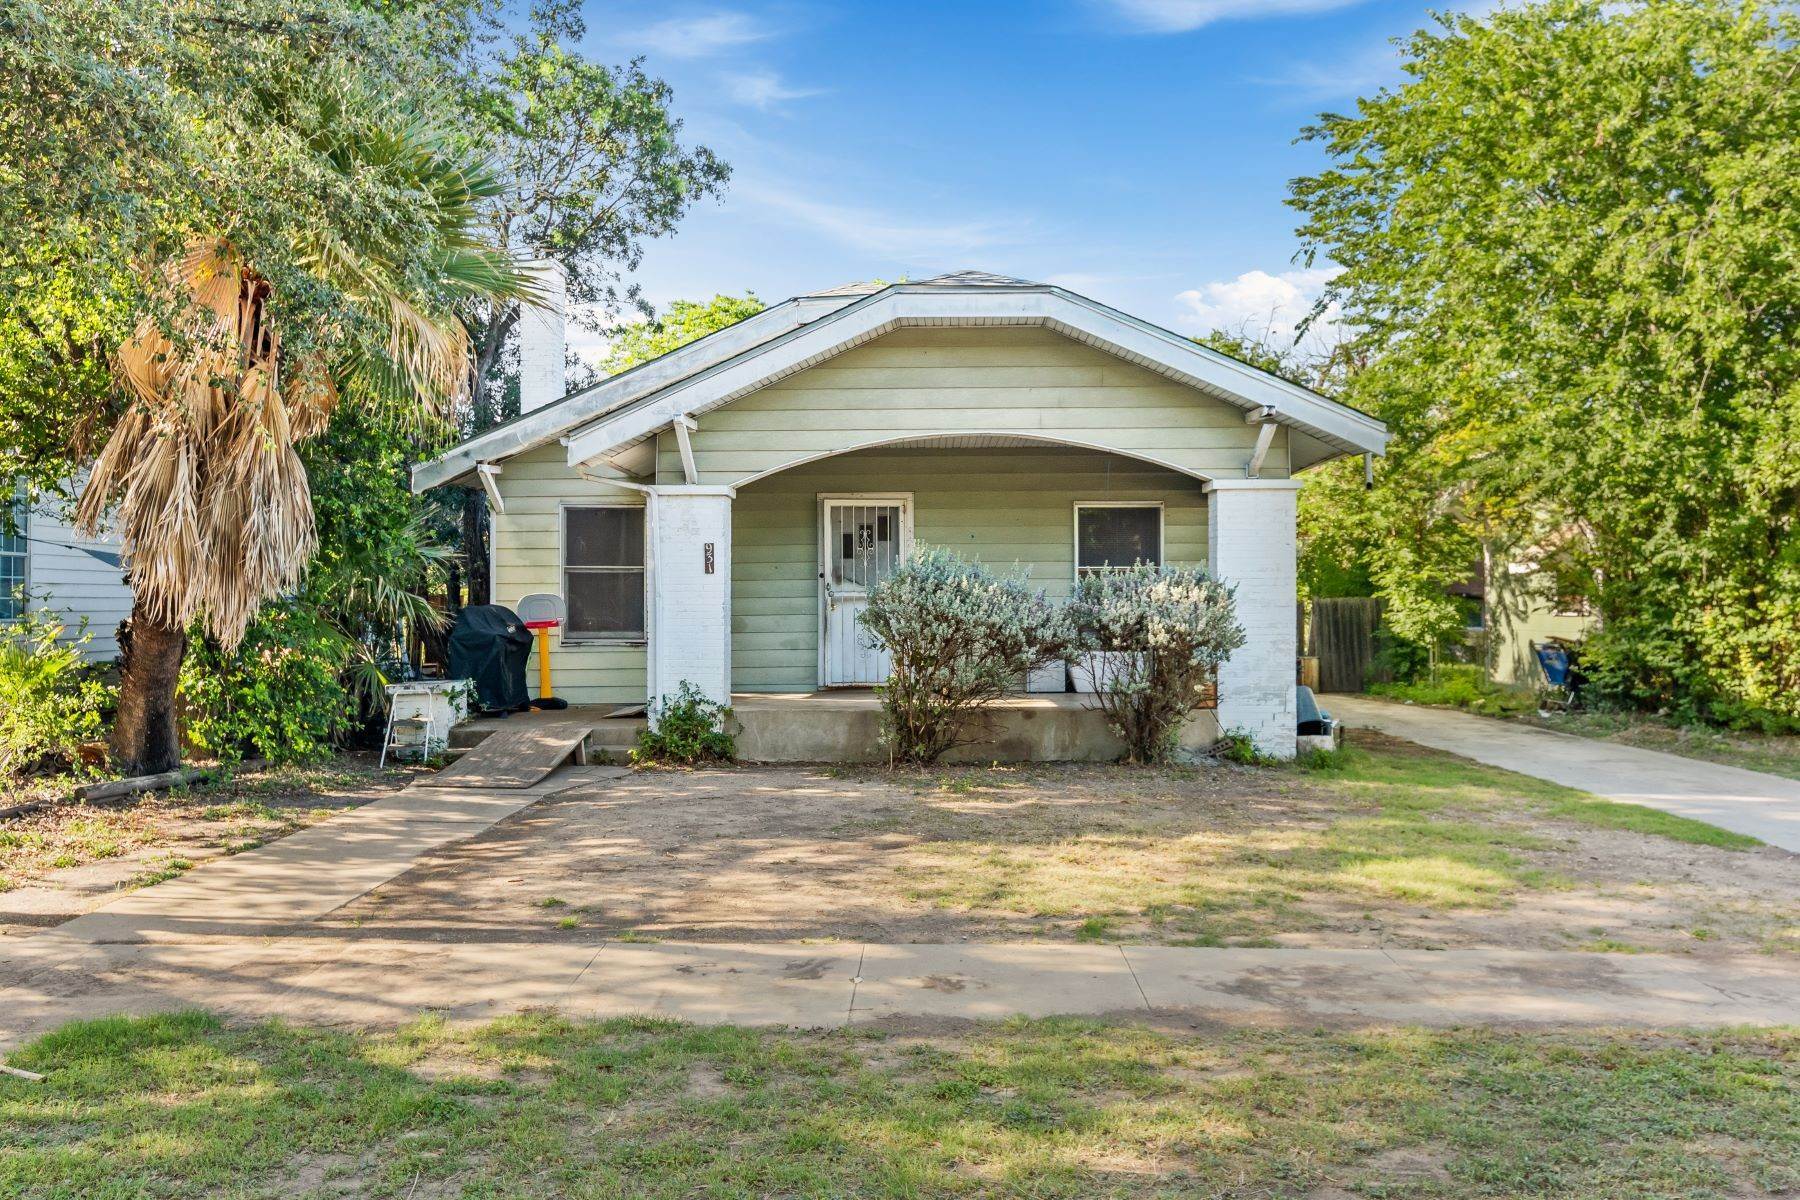 Property for Sale at 931 West Kings Highway, San Antonio, TX 78201 931 West Kings Highway San Antonio, Texas 78201 United States